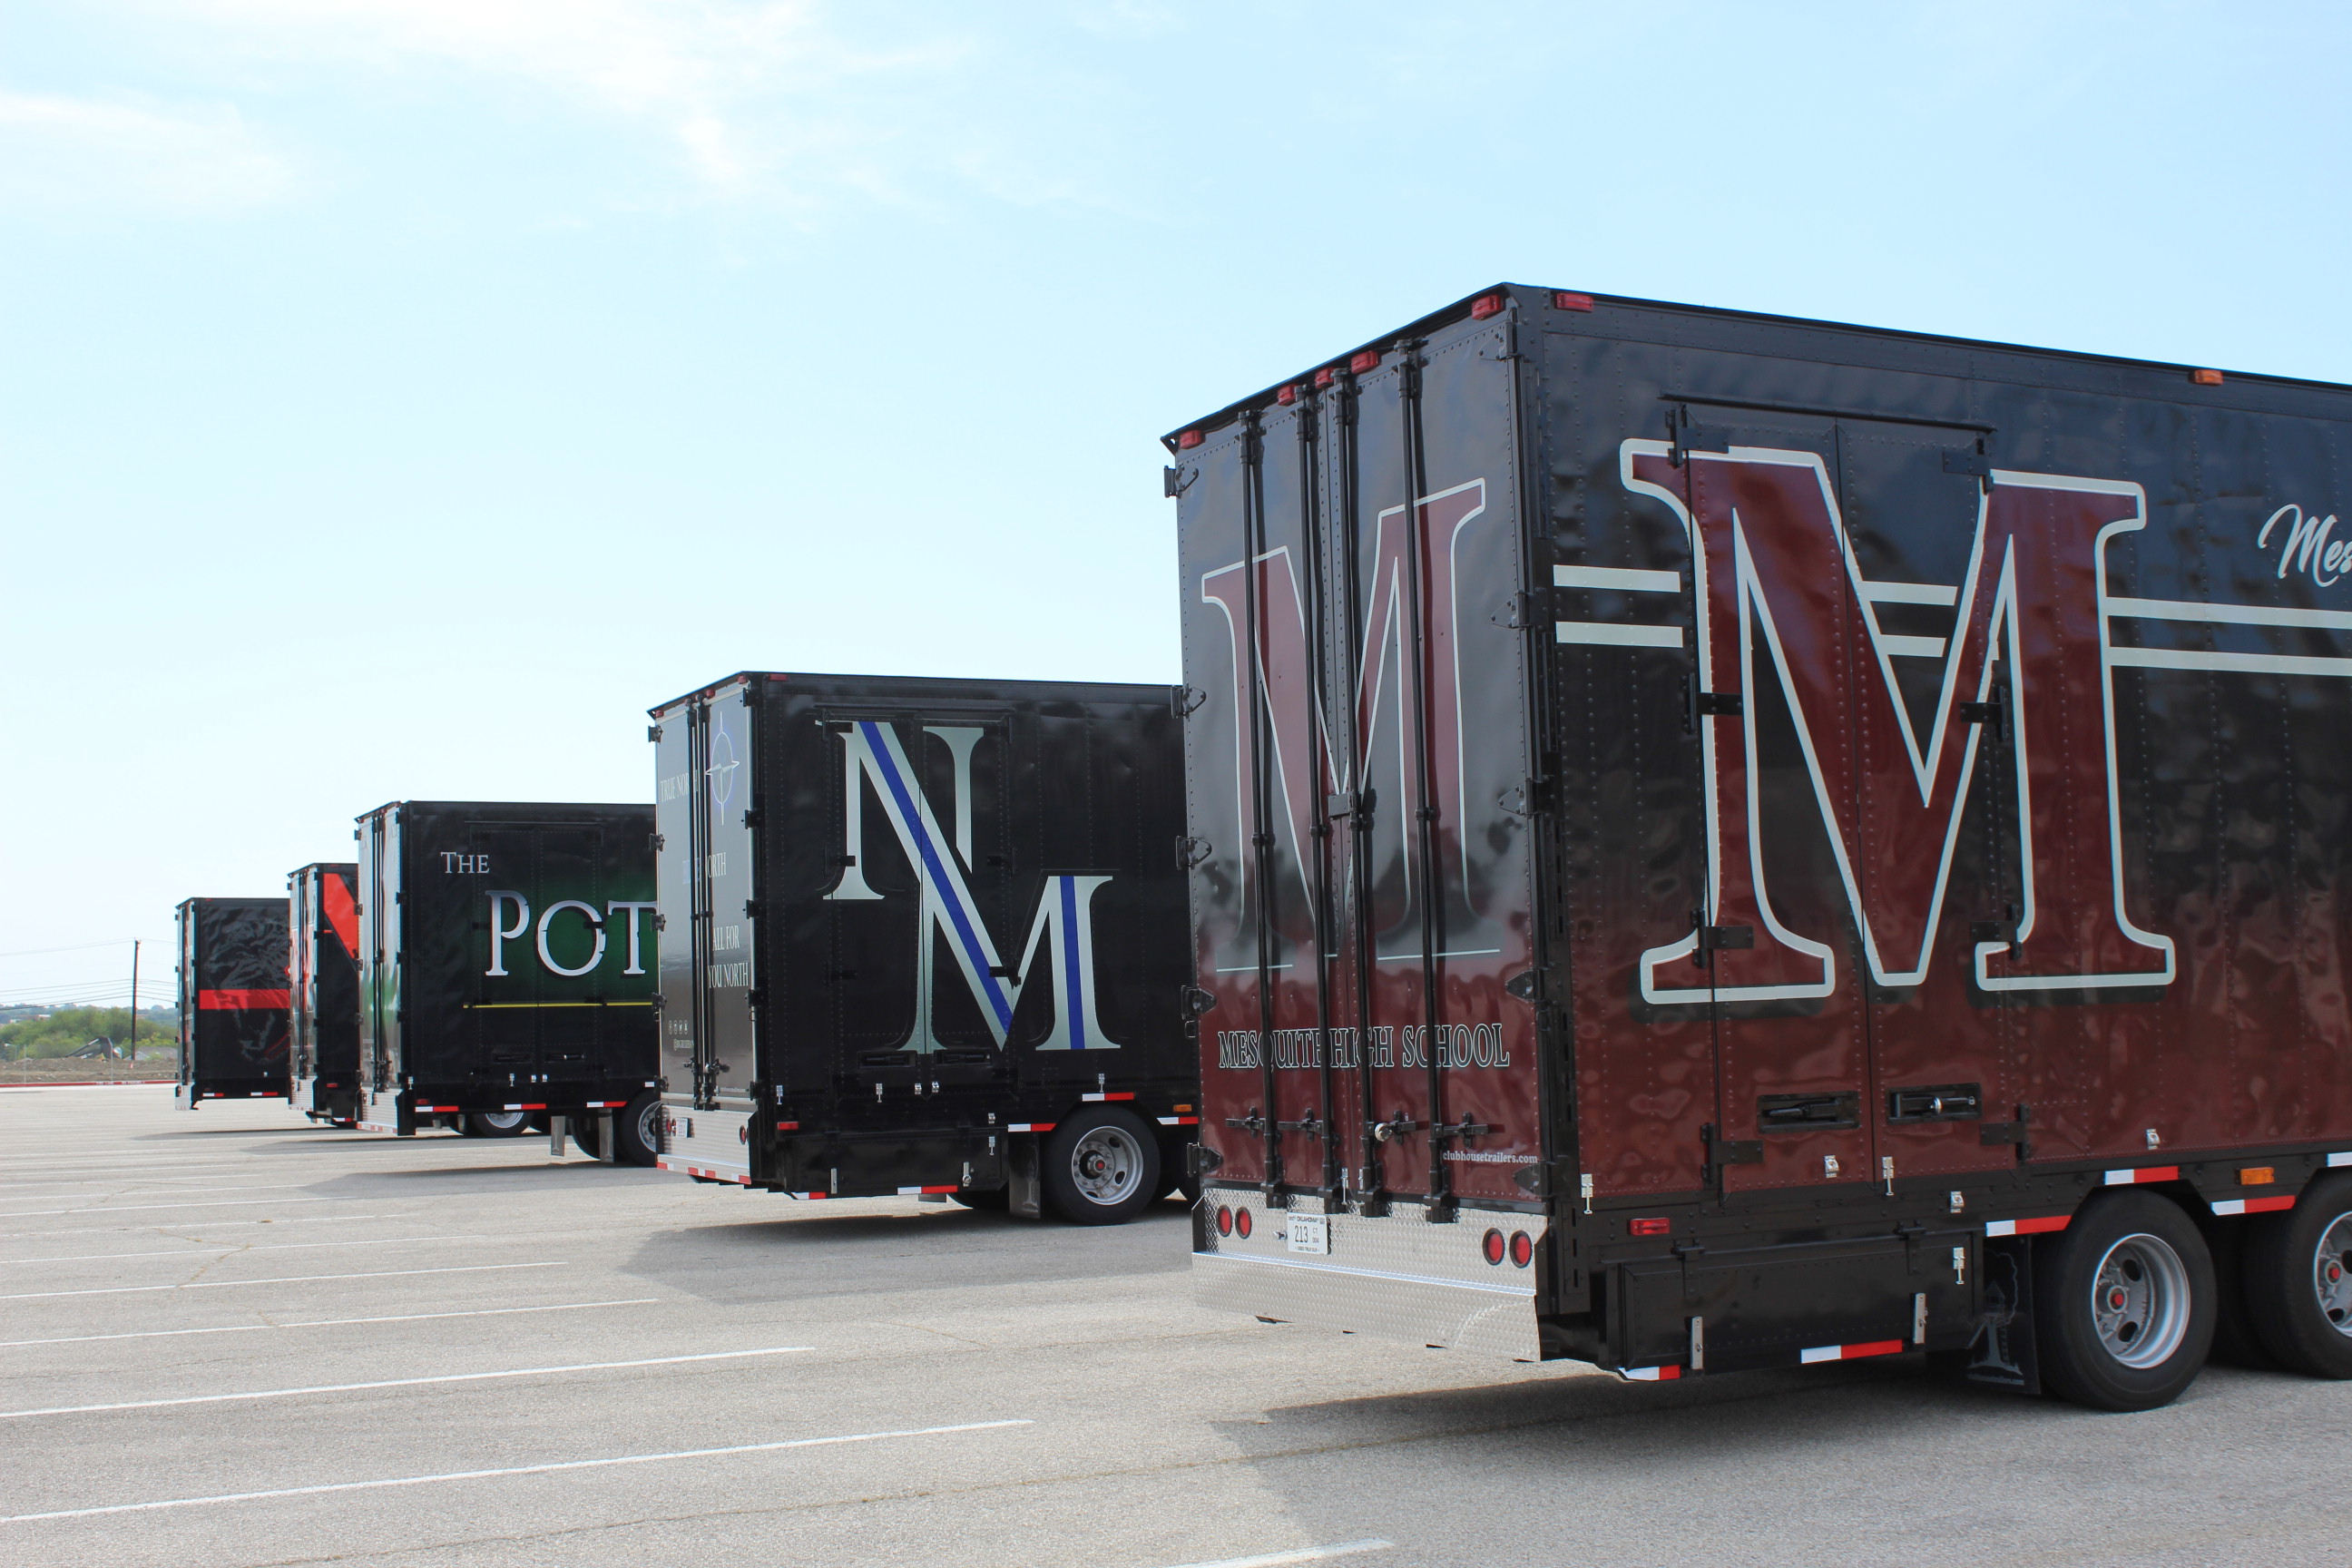 Mesquite ISD High School Marching Band Trailers on Display